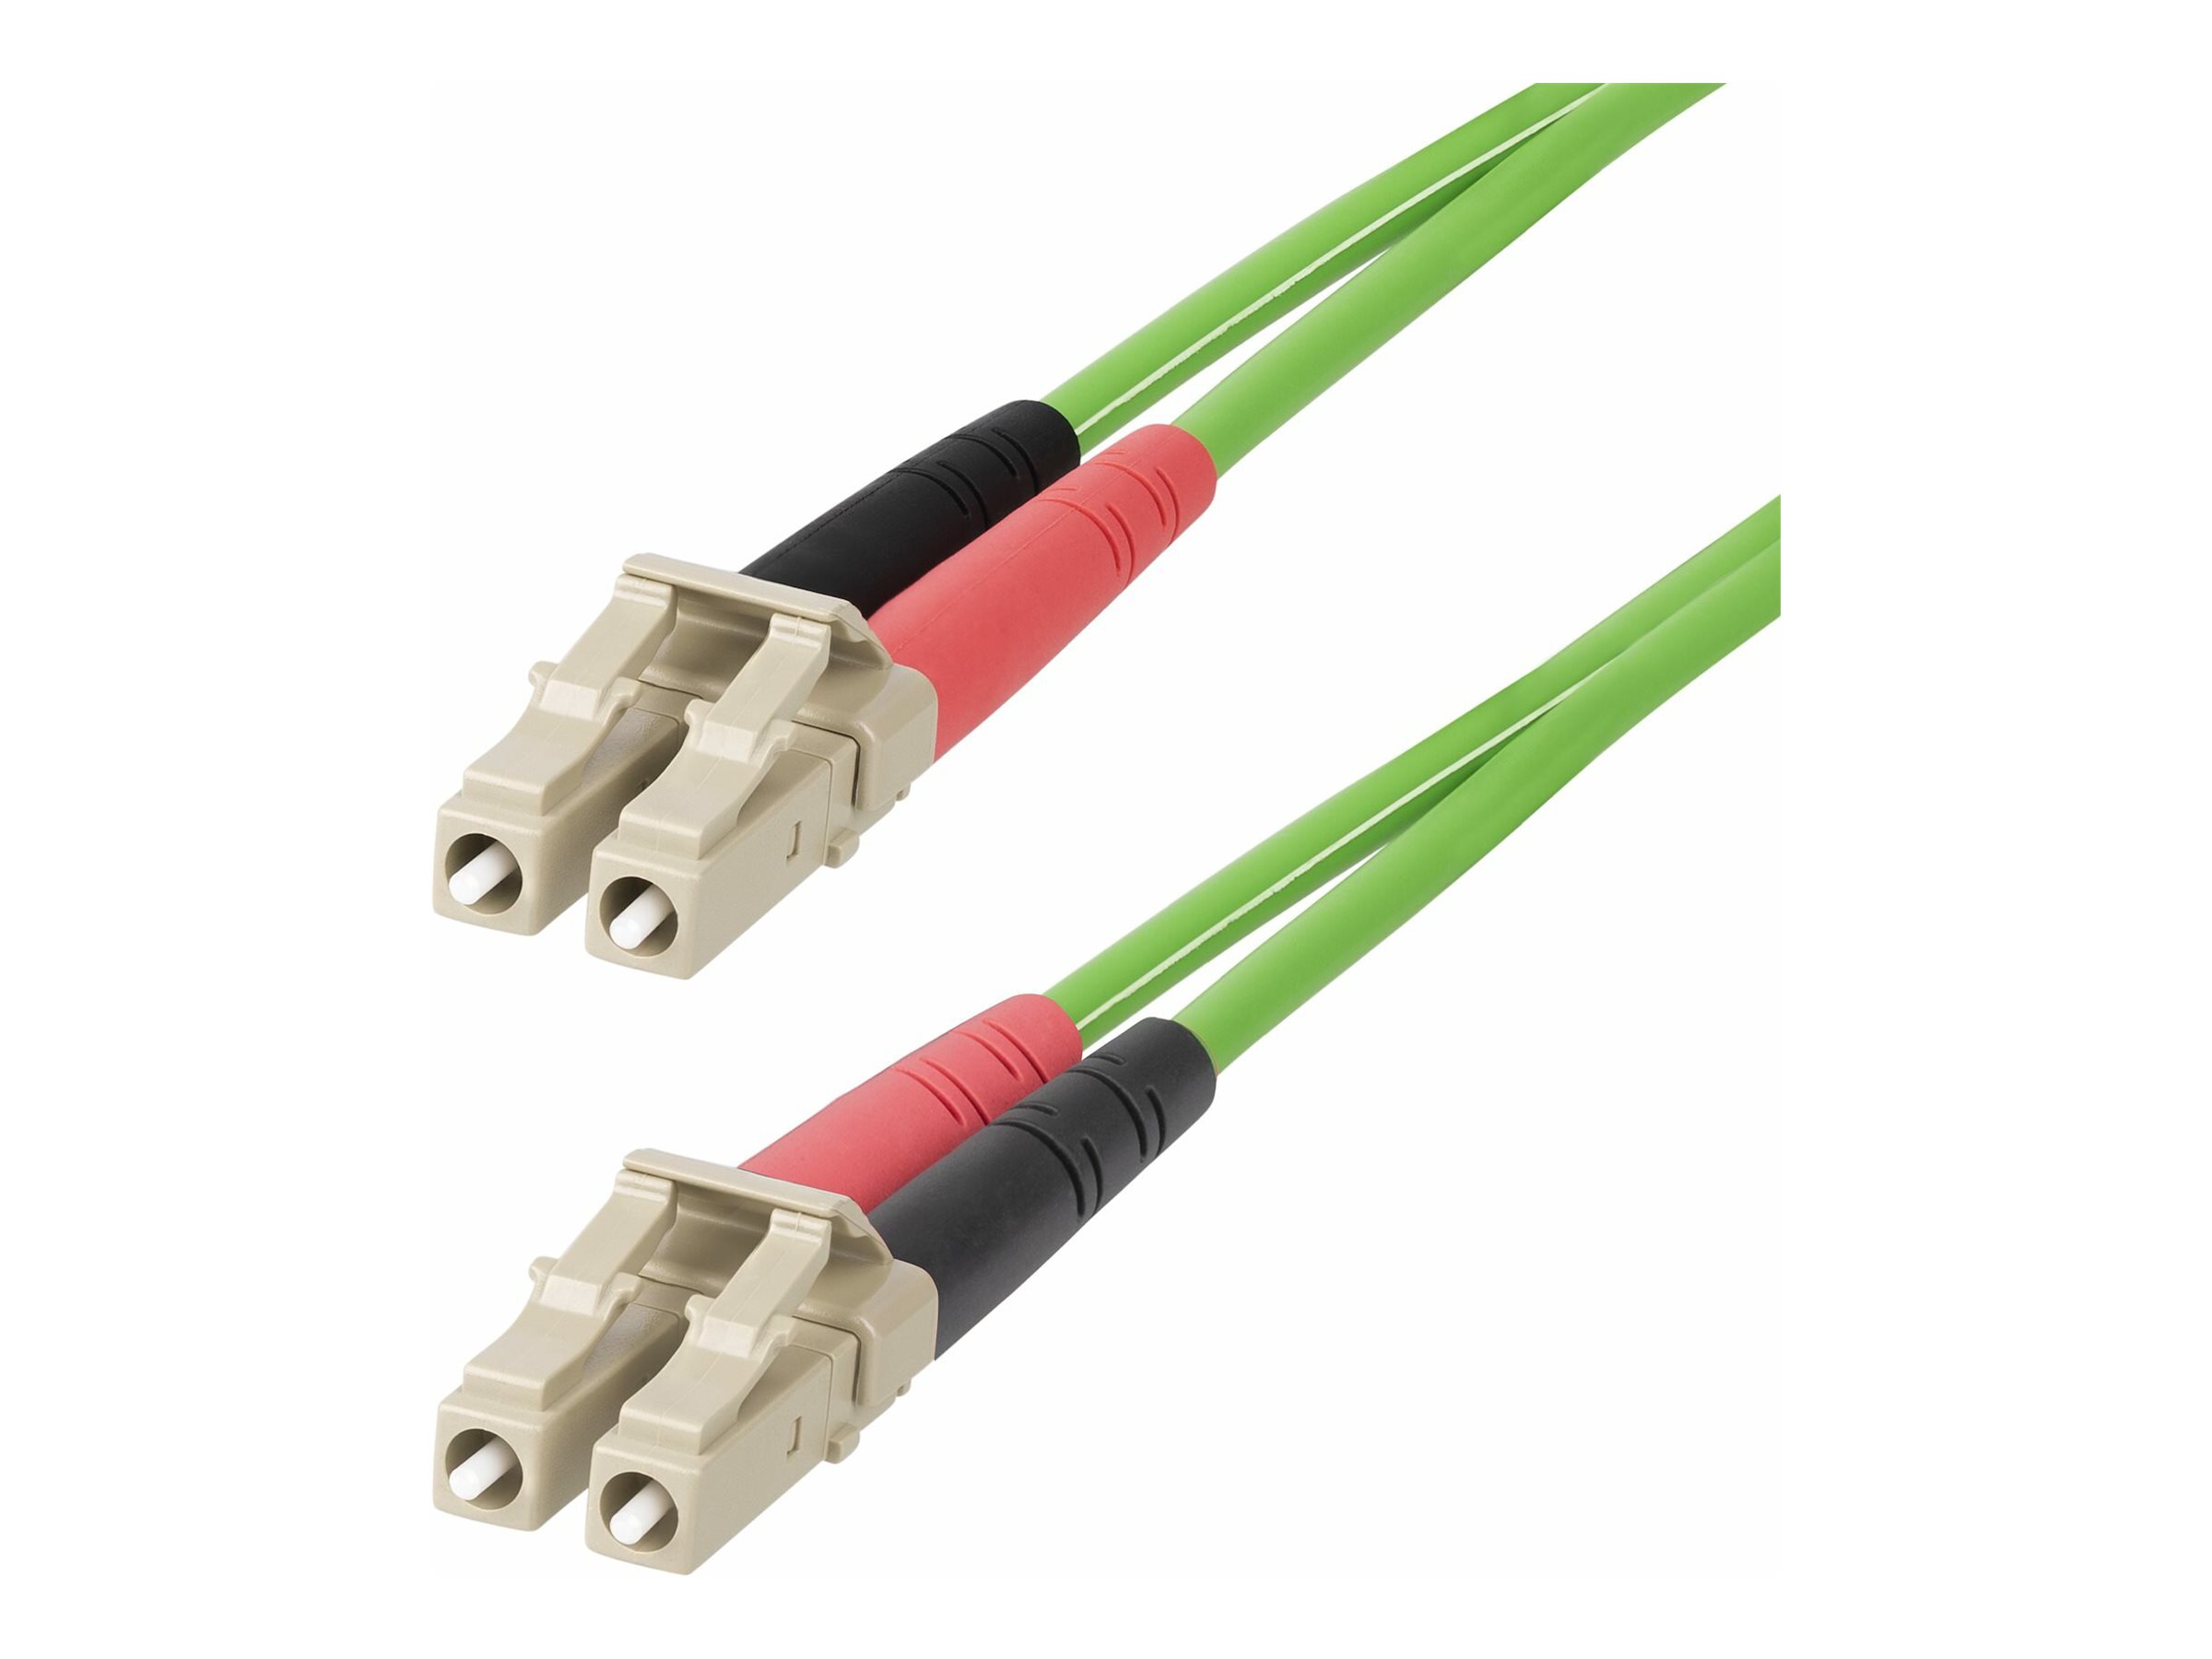 StarTech.com 1m (3ft) LC to LC (UPC) OM5 Multimode Fiber Optic Cable, 50/125m Duplex LOMMF Zipcord, VCSEL, 40G/100G, Bend Insen